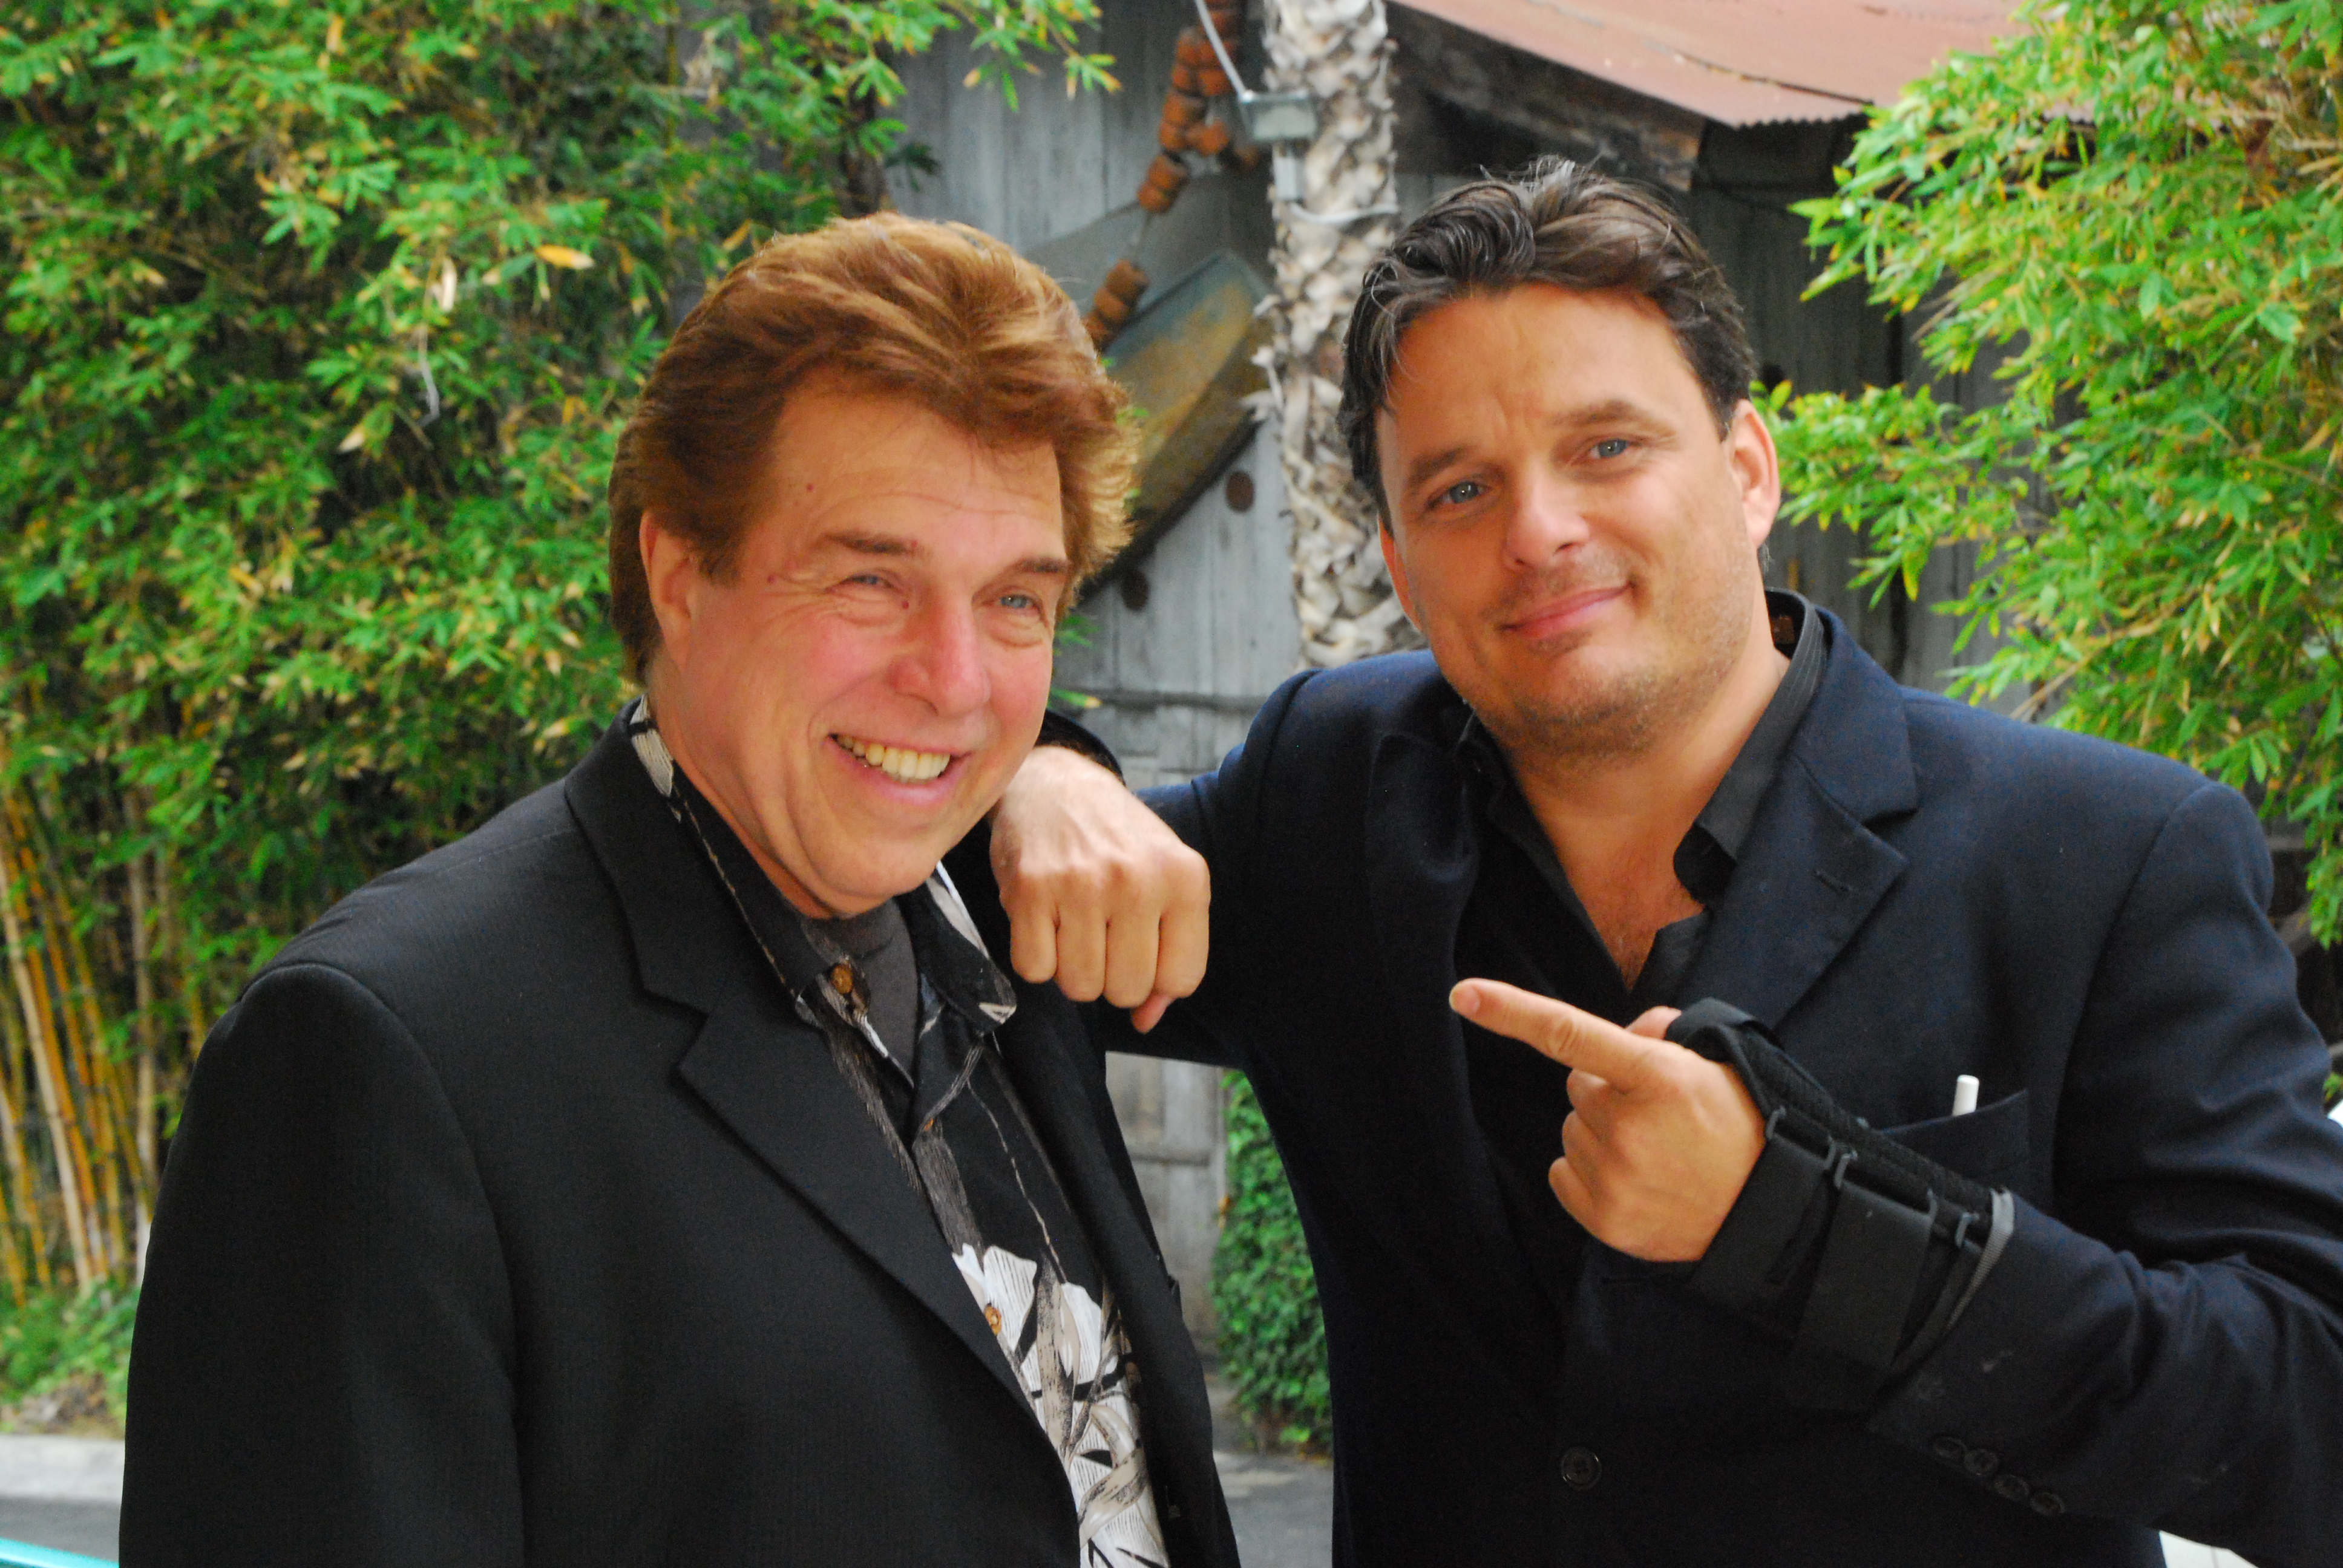 Damian Chapa (Blood In, Blood Out, Under Siege, Street Fighter) and Pete Allman